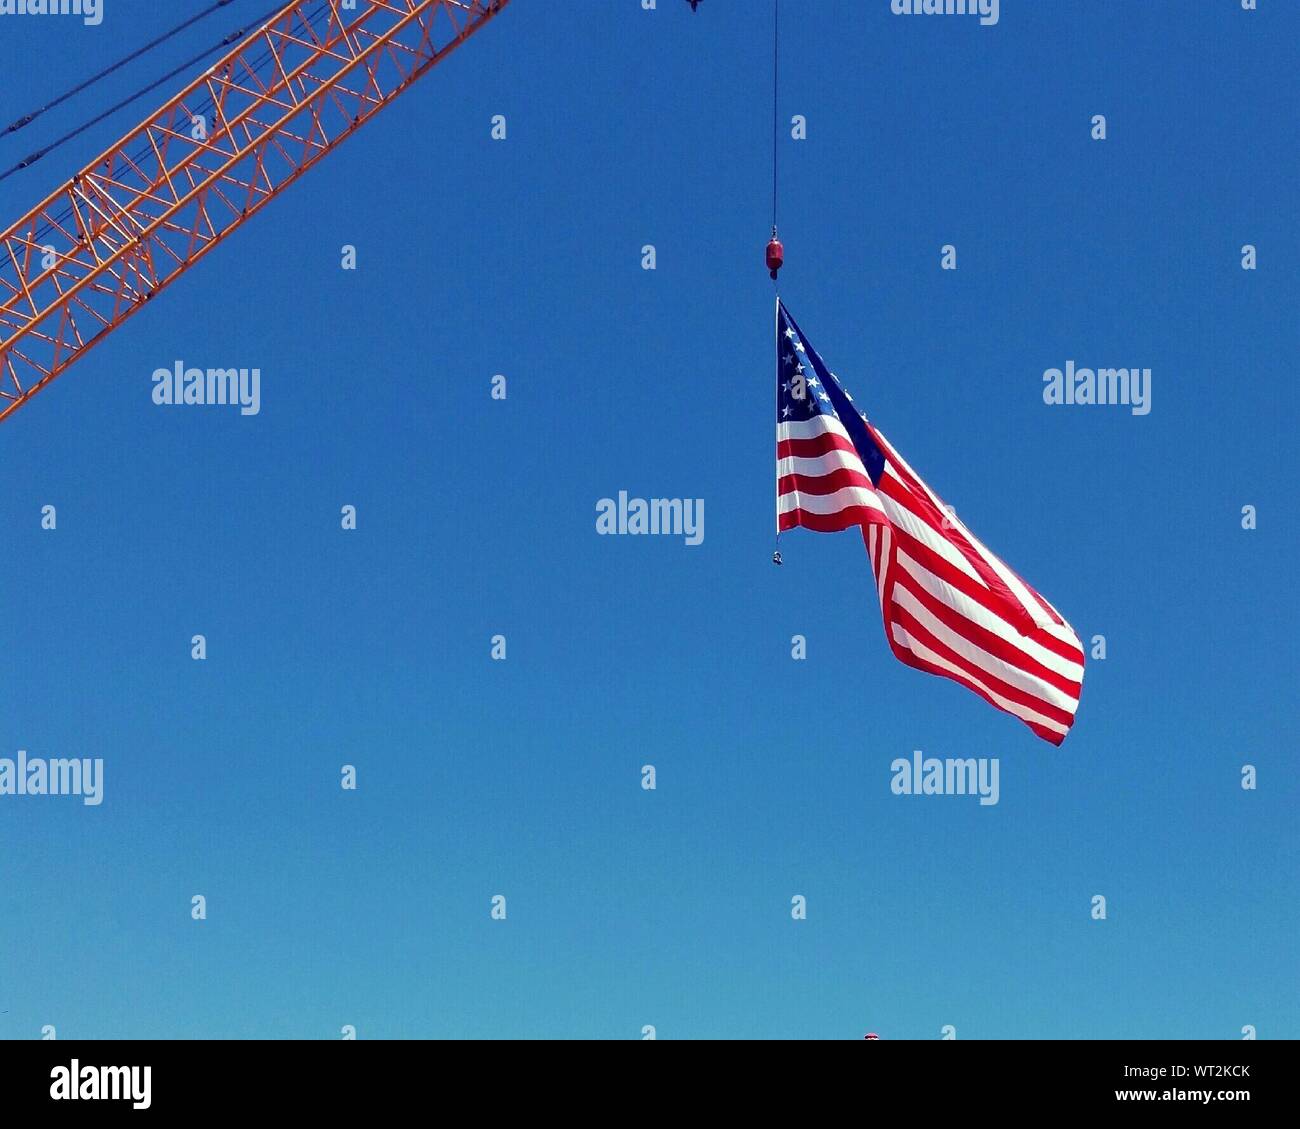 Low Angle View Of American Flag Hanging On Crane Against Clear Blue Sky Stock Photo